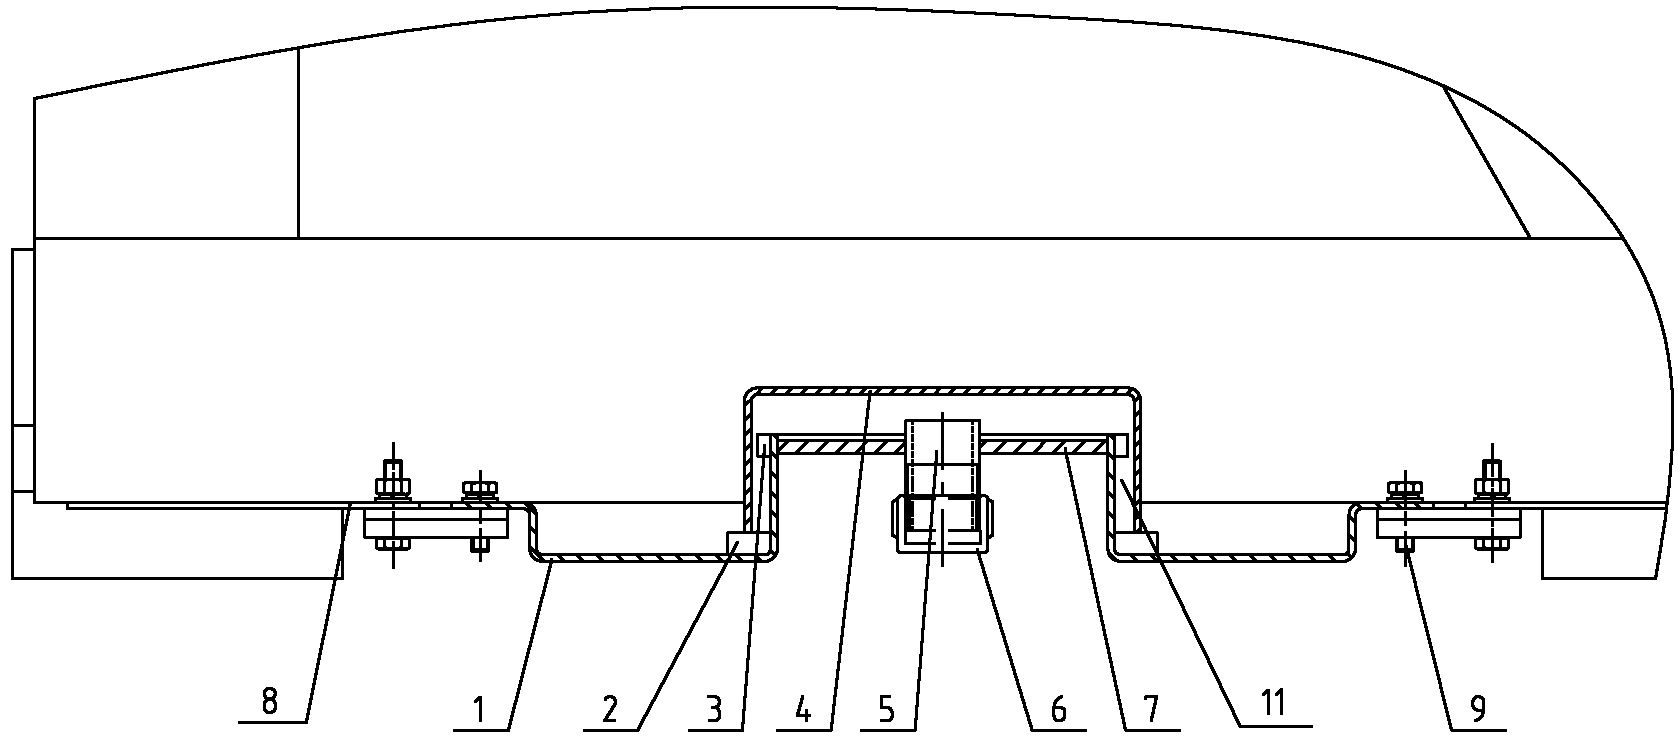 Drainage device of escalator or moving pavement